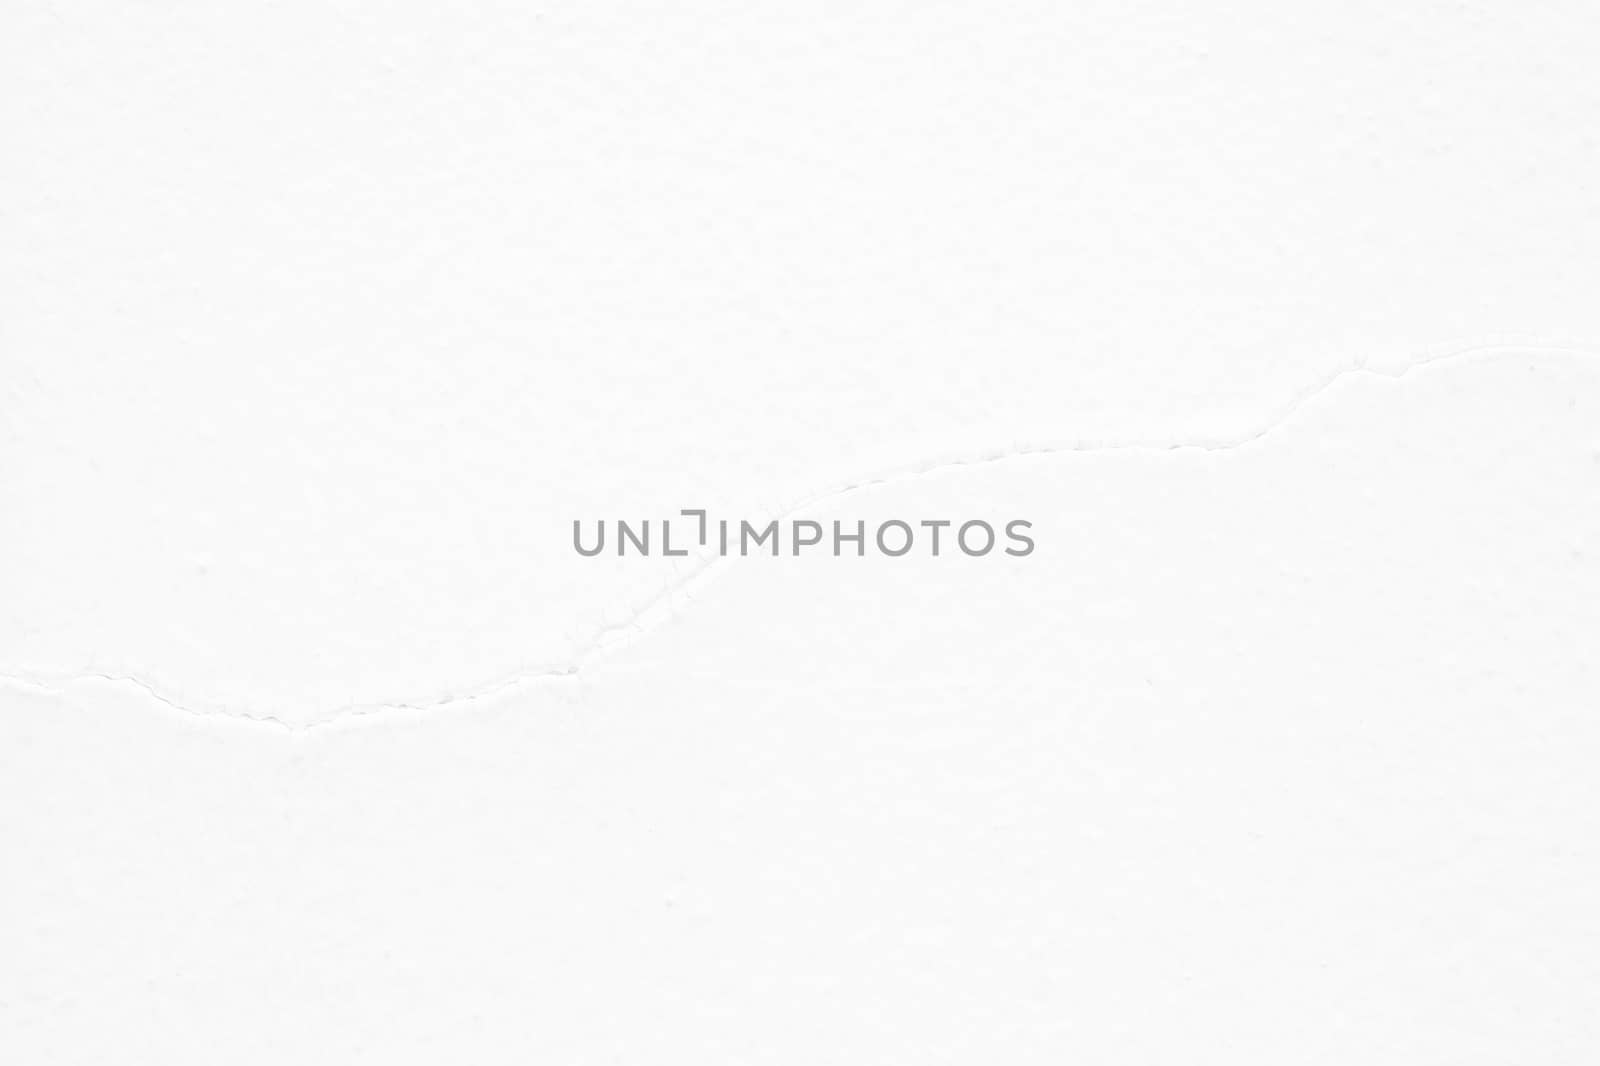 White Broken Concrete Ground Texture Background. by mesamong